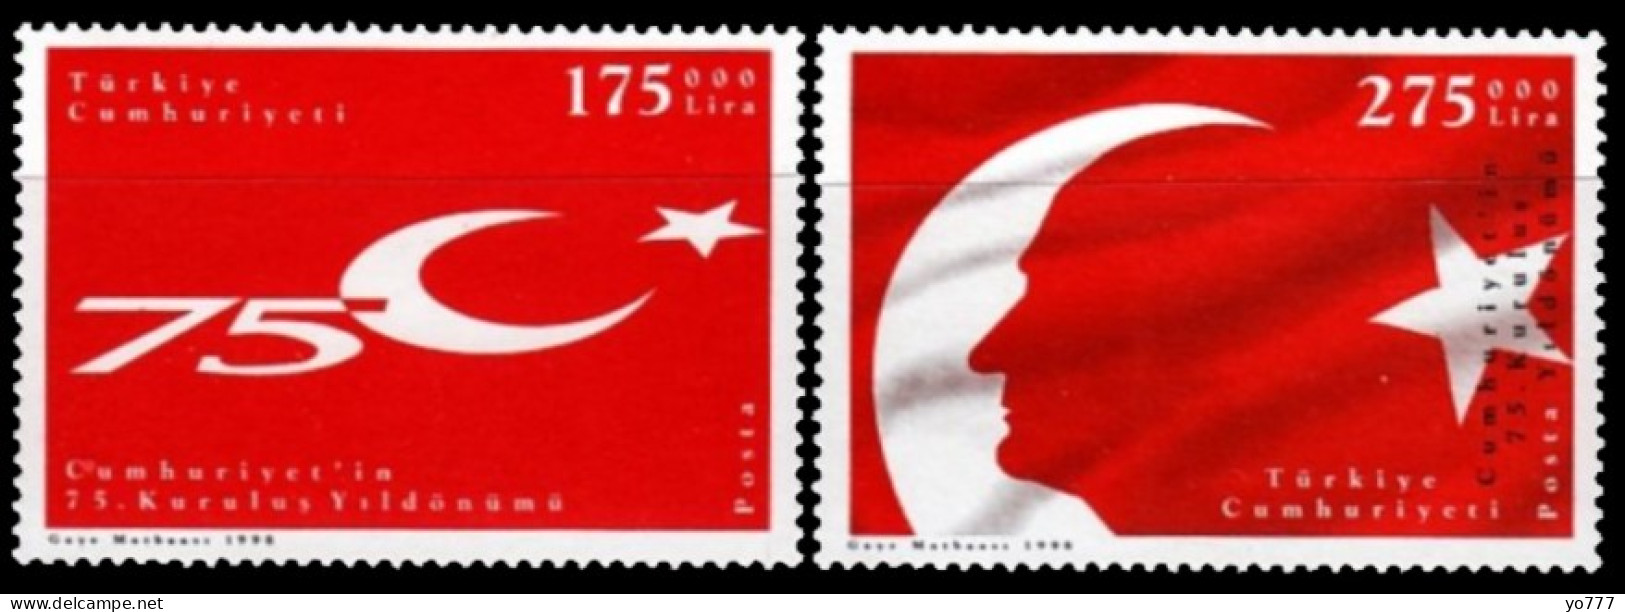 (3159-60) TURKEY 75th ANNIVERSARY OF THE FOUNDATION OF TURKISH REPUBLIC FLAG MNH** - Unused Stamps